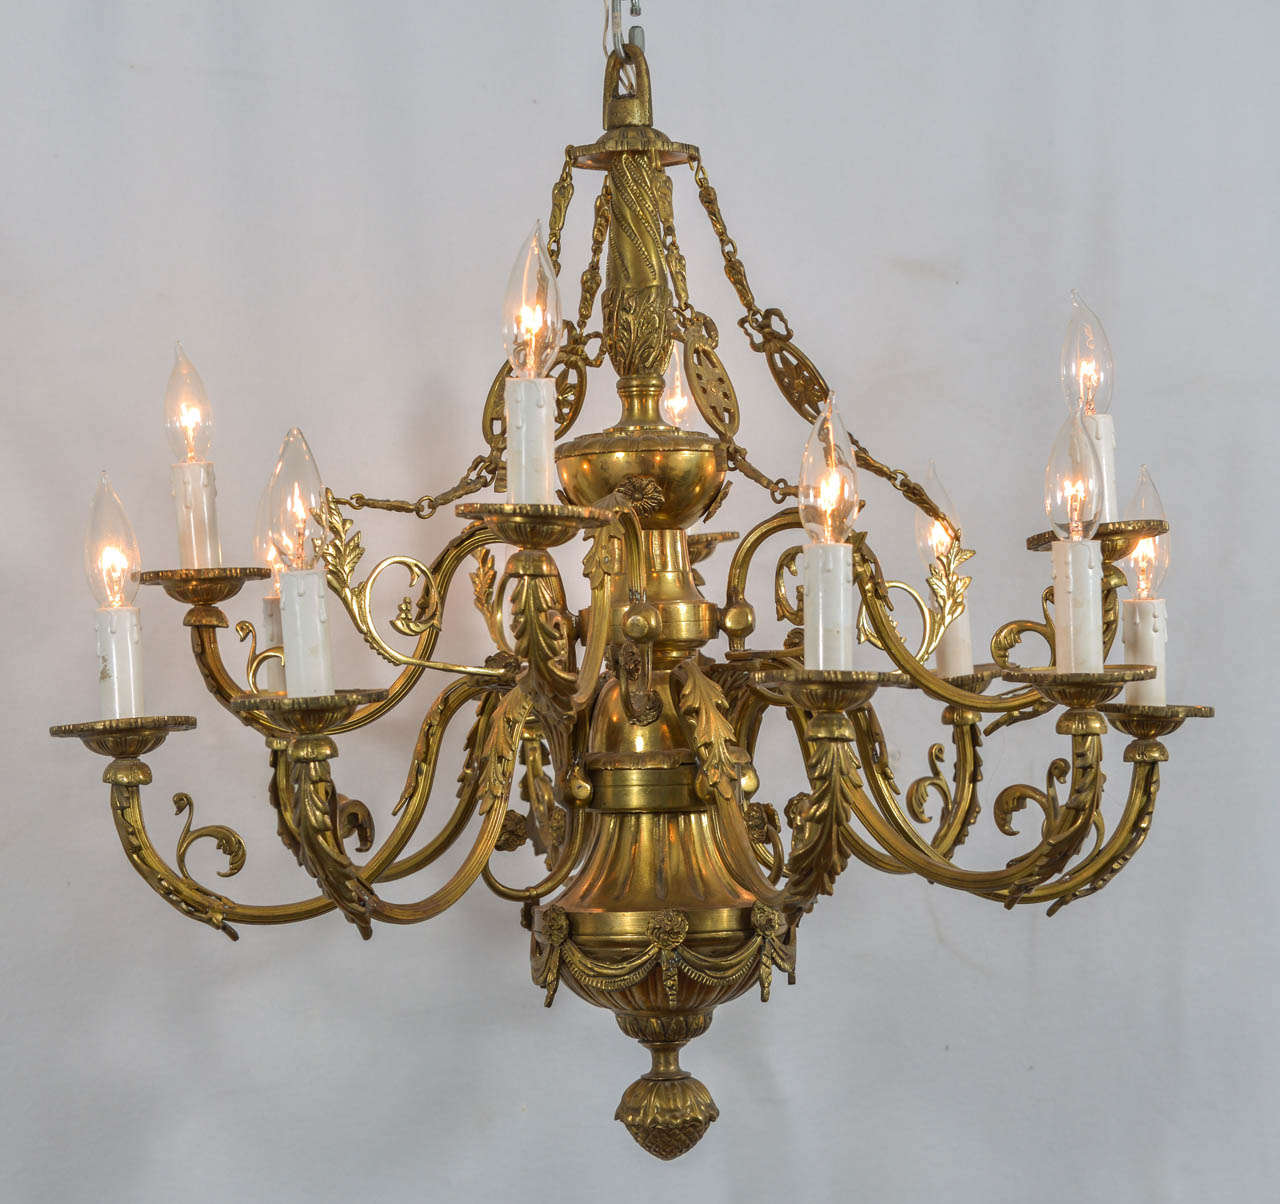 Cast Bronze, 12 Light Chandelier in the style of Louie XVI, with beautiful swags, leaves, and curling arms.